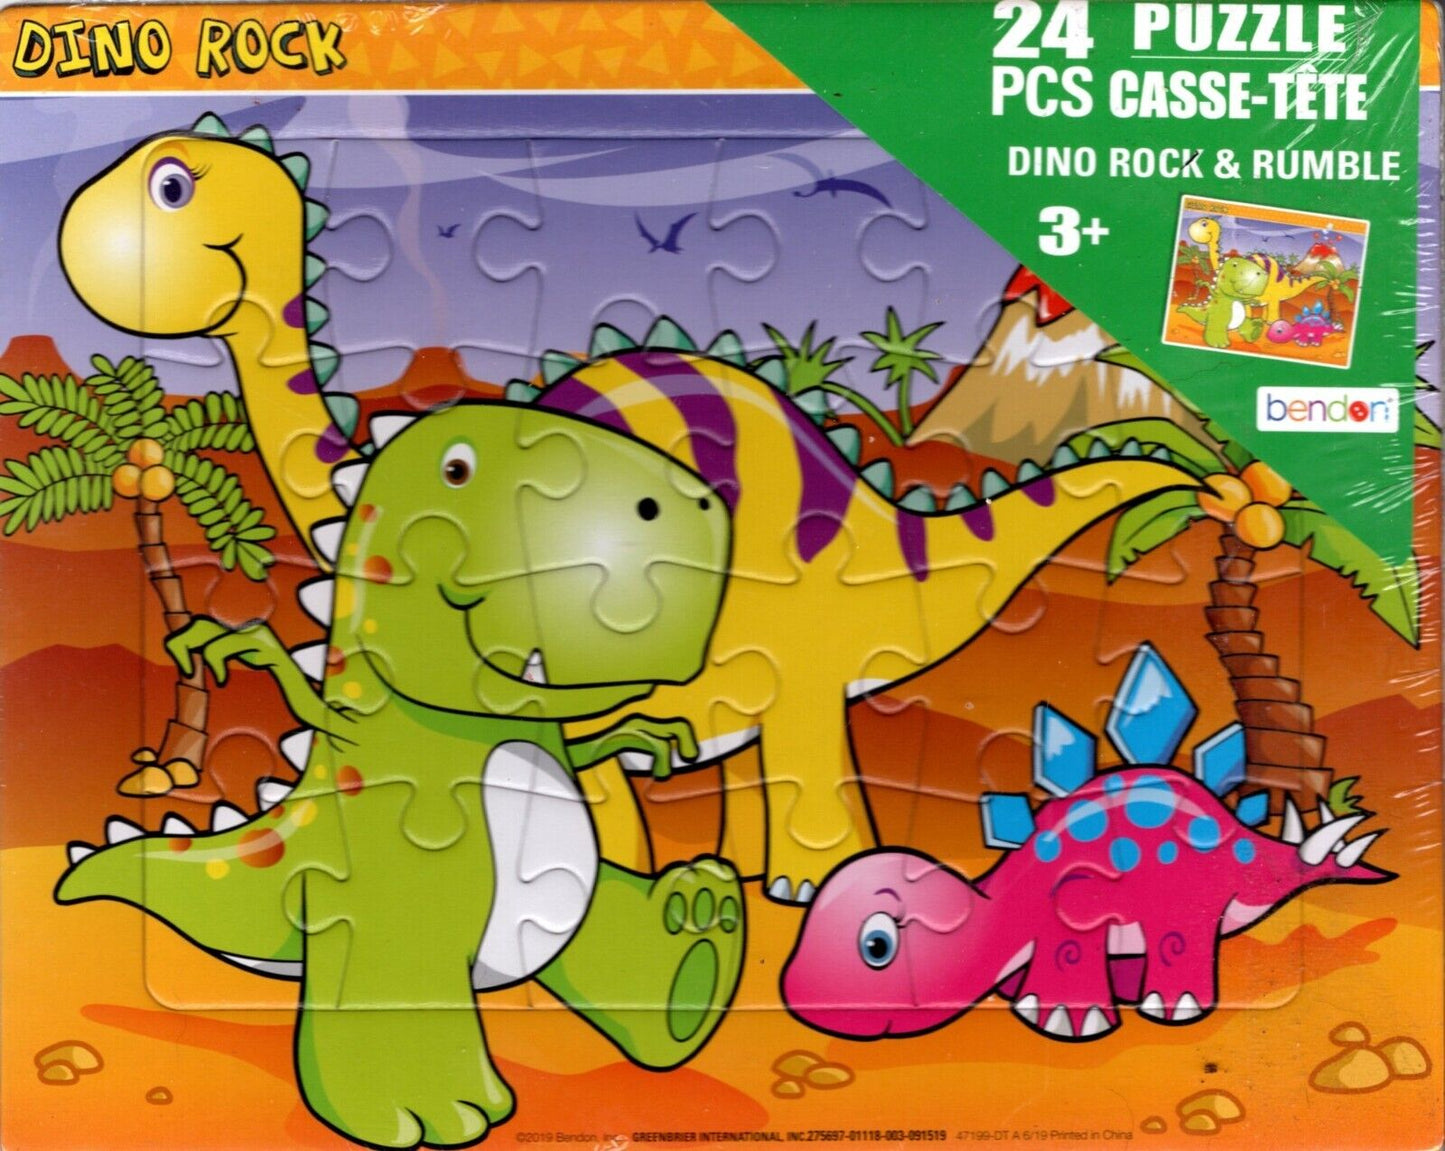 Dino Rock & Rumble - 24 Pieces Jigsaw Puzzle